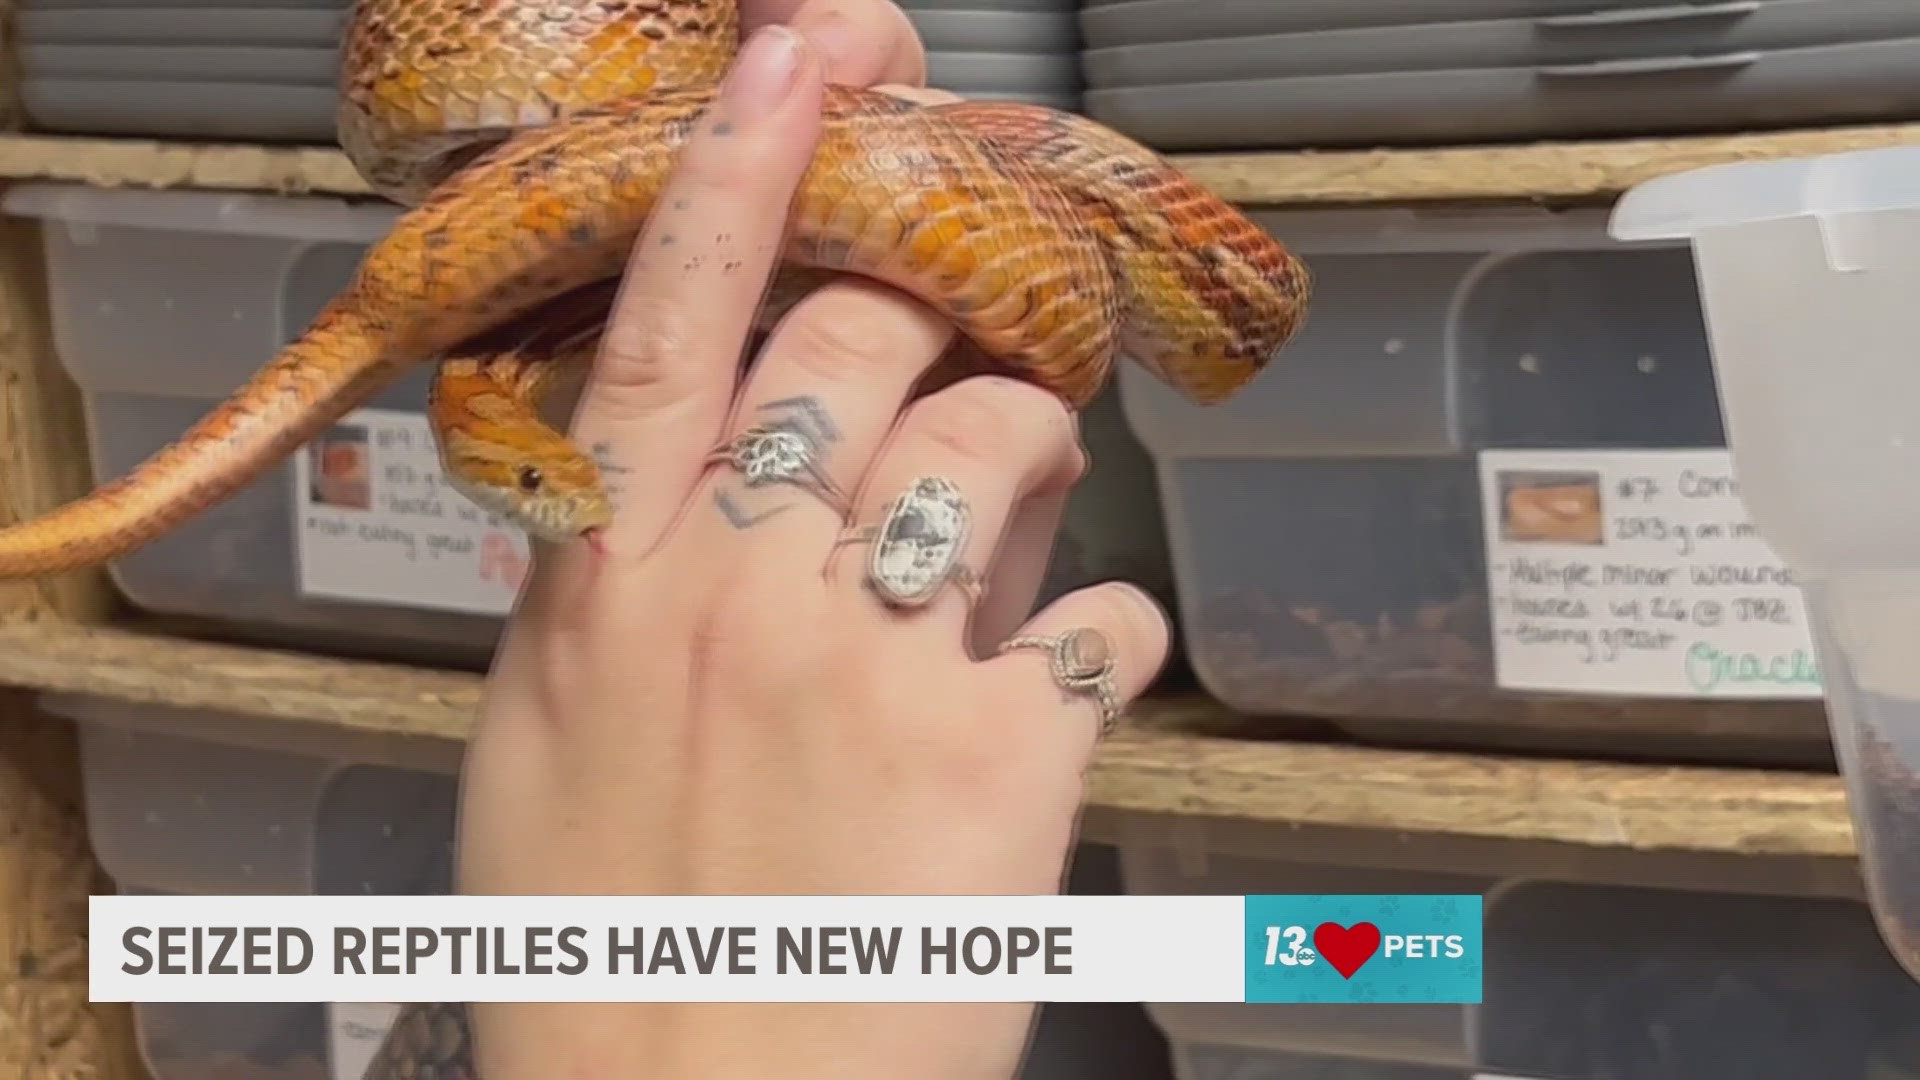 Dozens of reptiles were seized from a Gaines Township home on October 22. Some were already dead and the rest were clinging to life. But they now have hope.